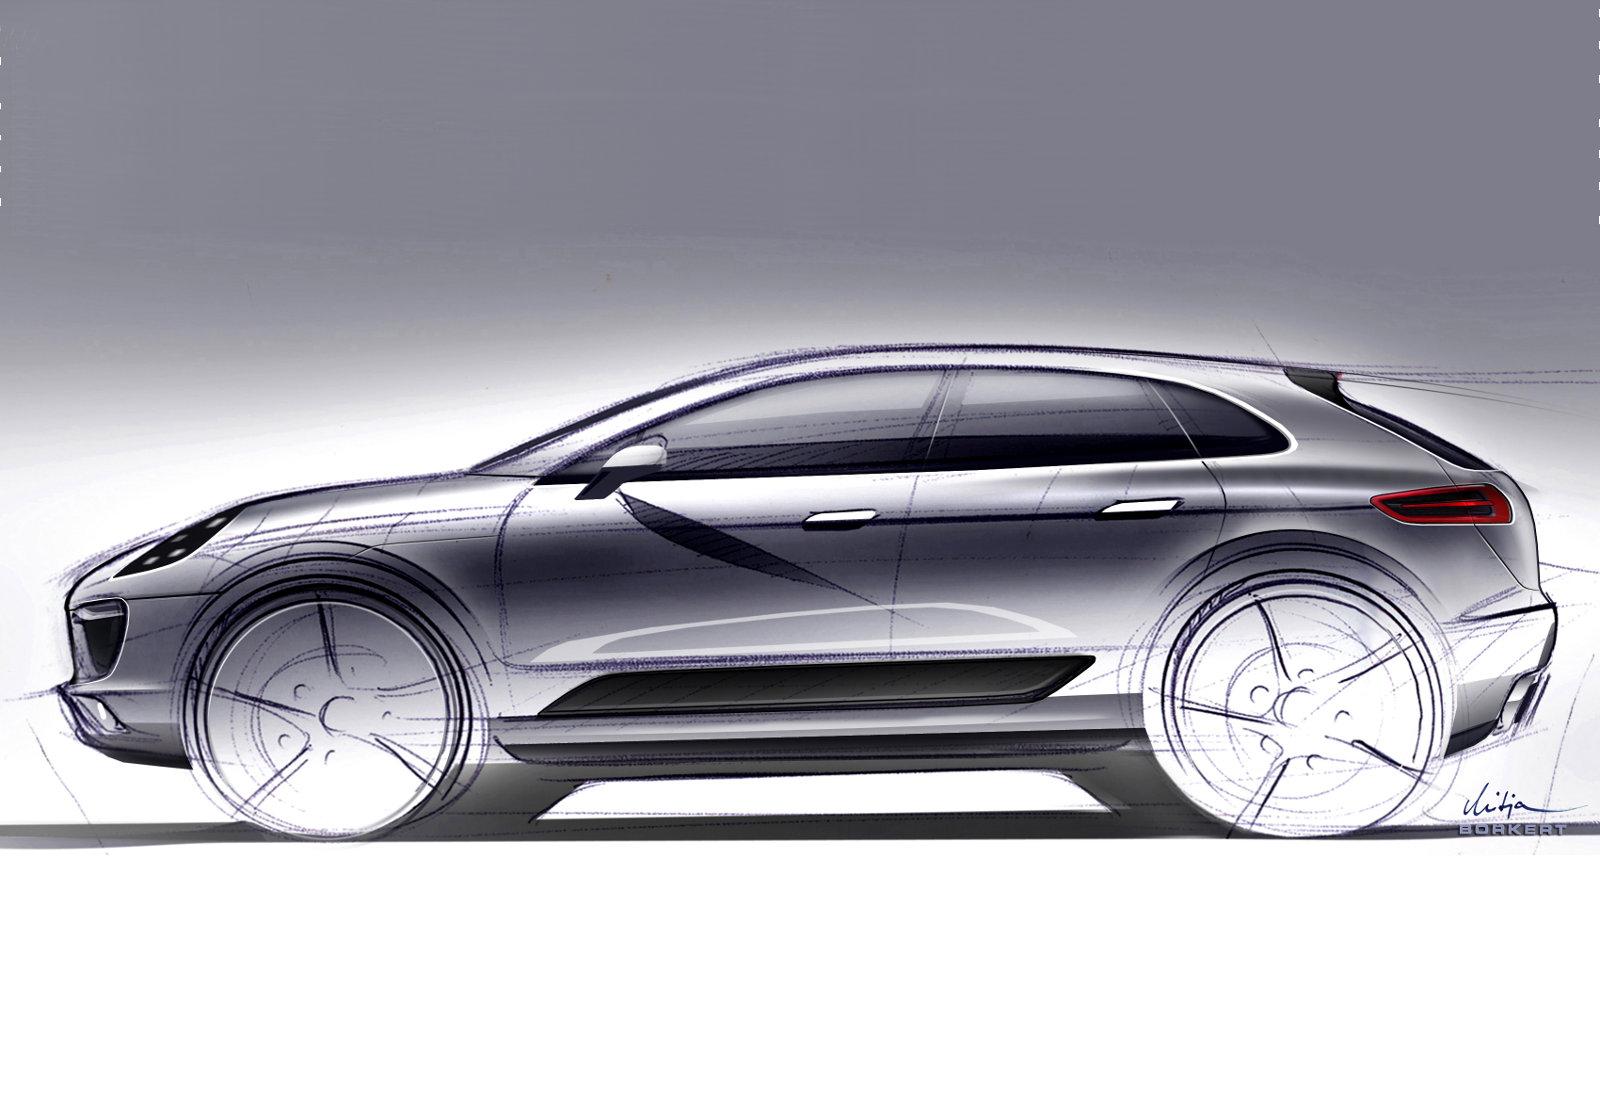 Porsche Macan SUV to debut at 2013 Los Angeles show – report